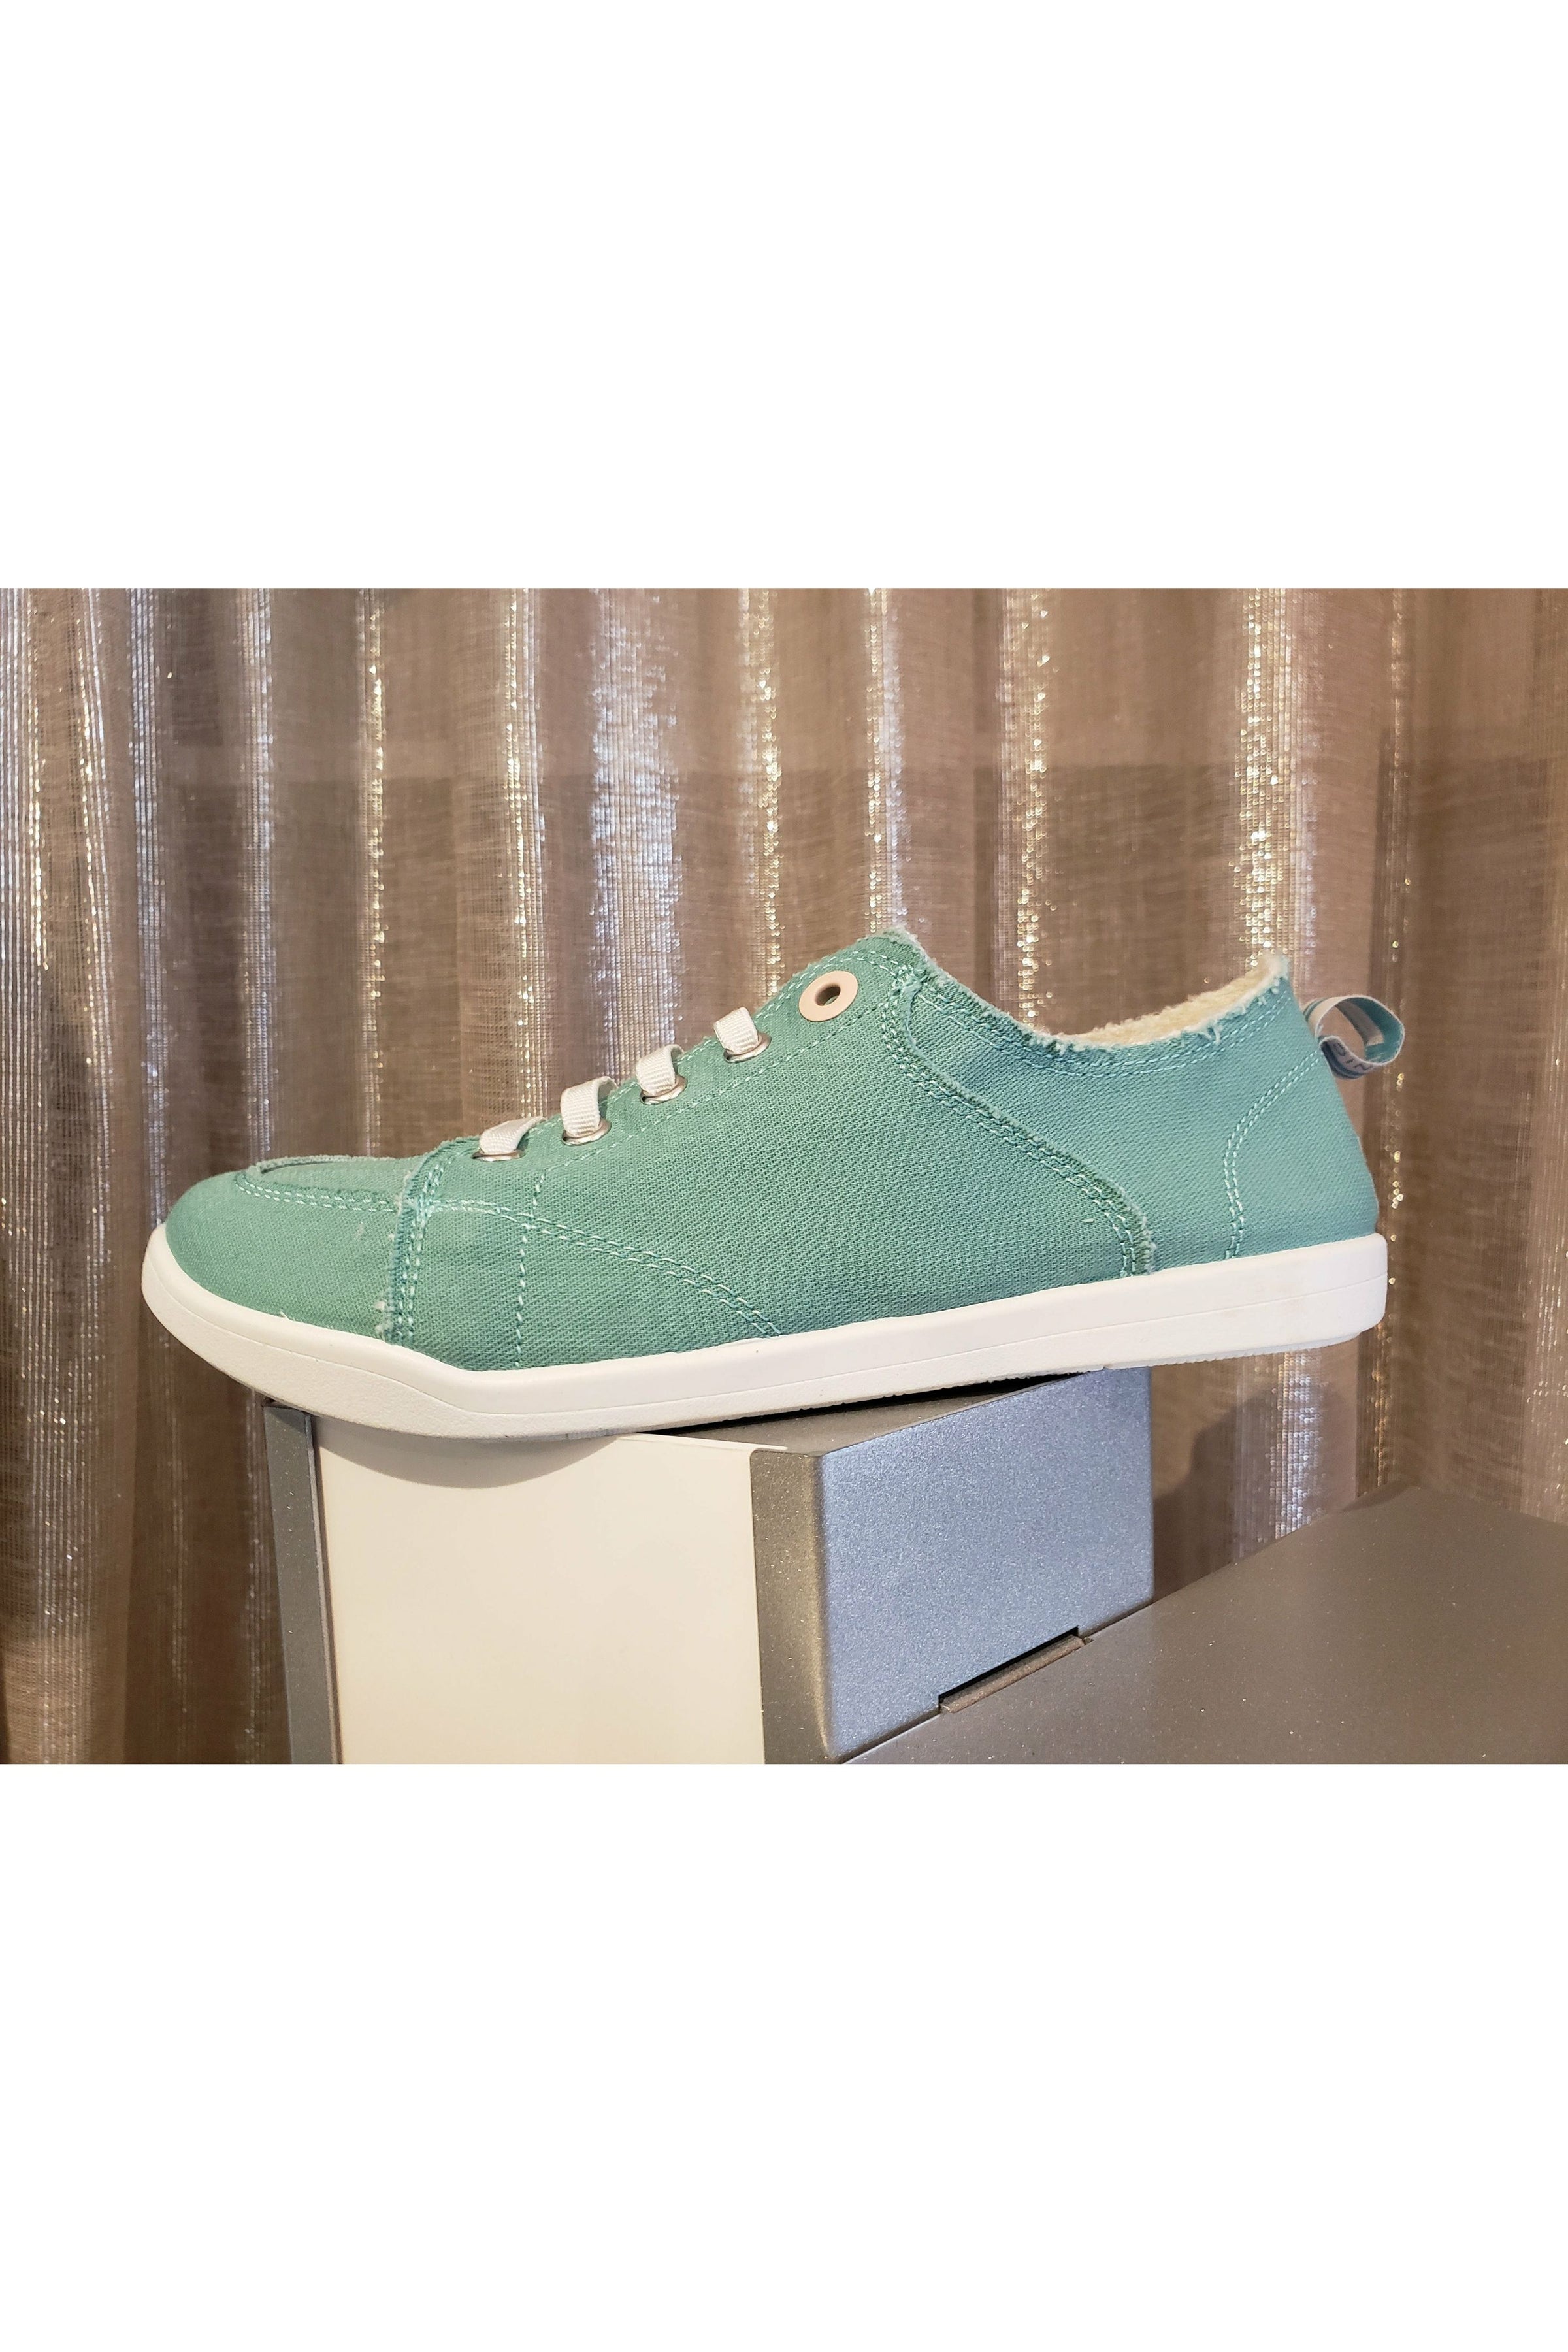 Vionic Venice Canvas Sneakers - Style Pismo CNVS, outside, wasabi